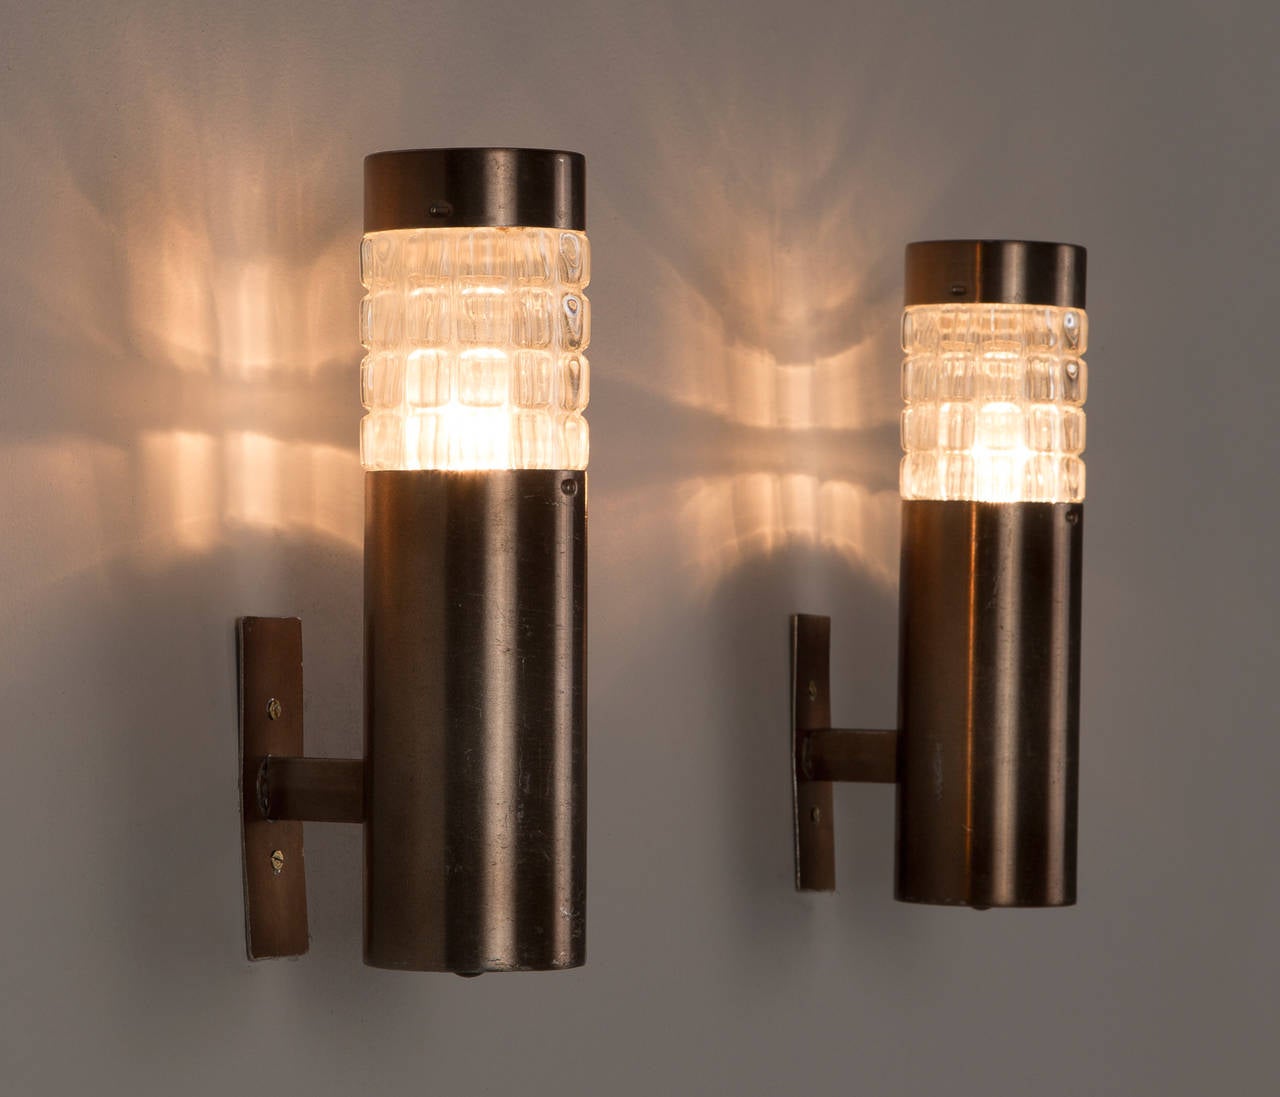 Set of four tubular sconces with structured glass in the manner of Studio BBPR.

Please note the price is per item.